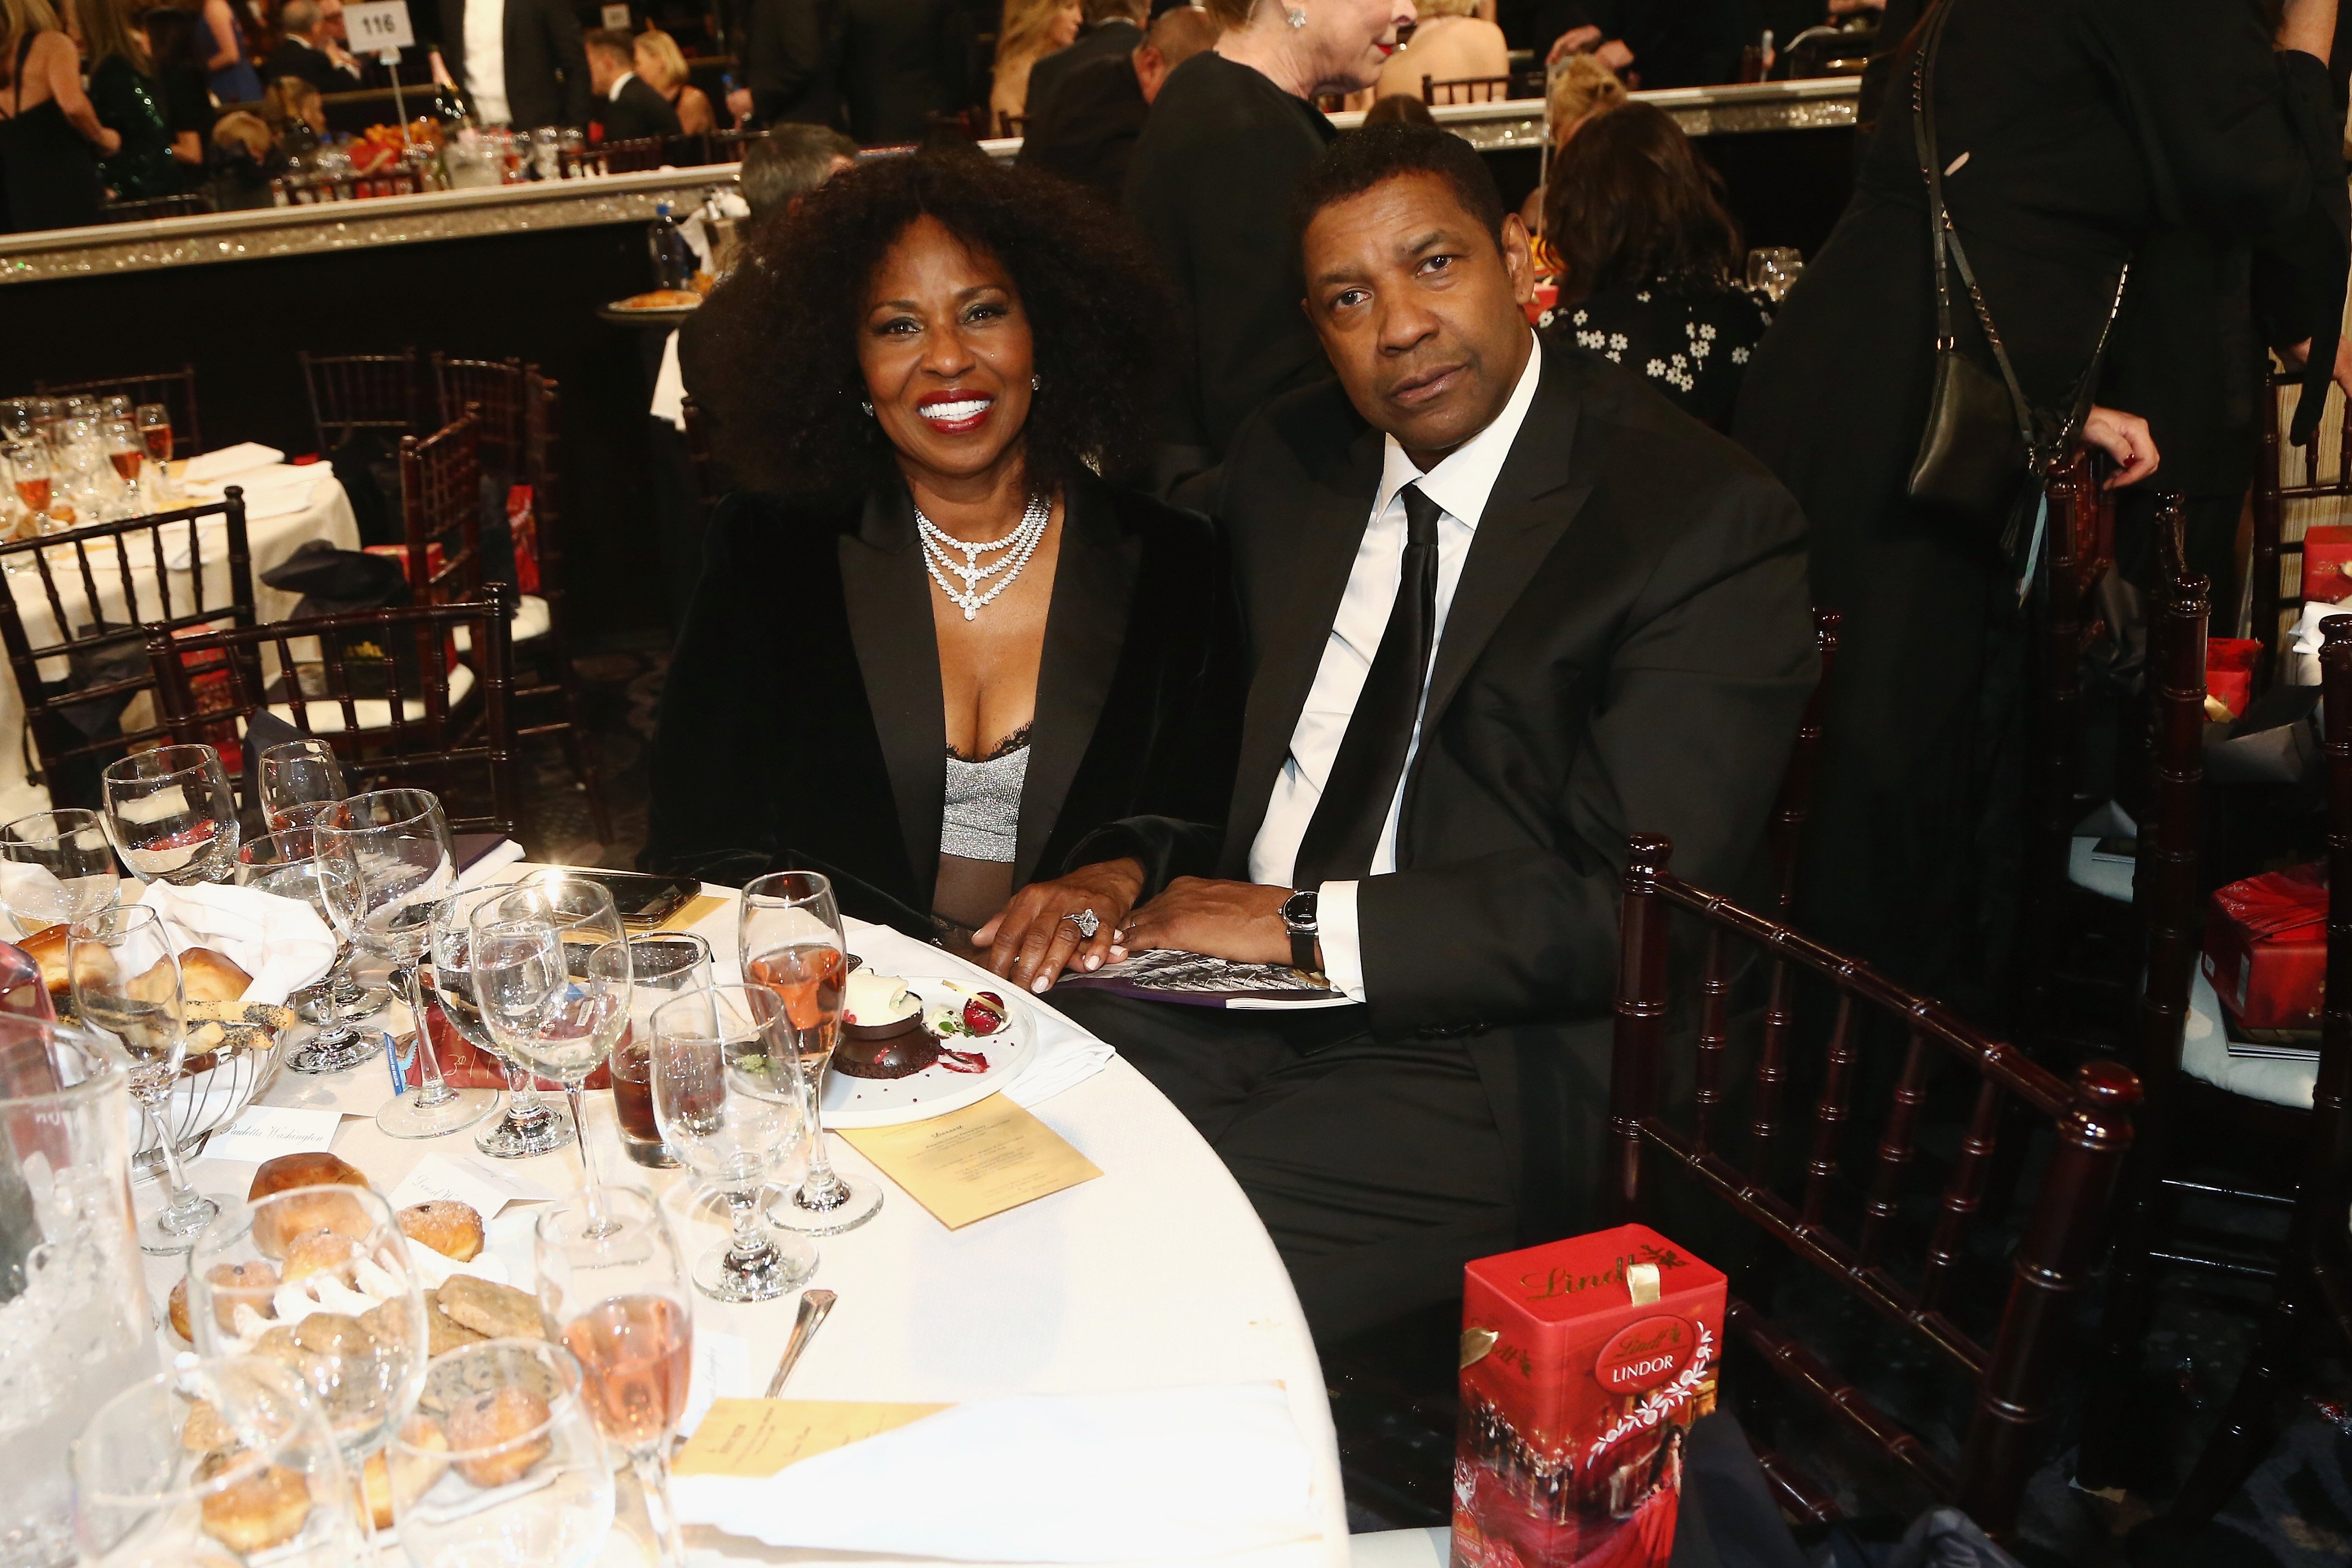 Denzel Washington and Pauletta Washington attend the The Golden Globe Awards Sponsored By Lindt Chocolate on January 6, 2019 | Source: Getty Images